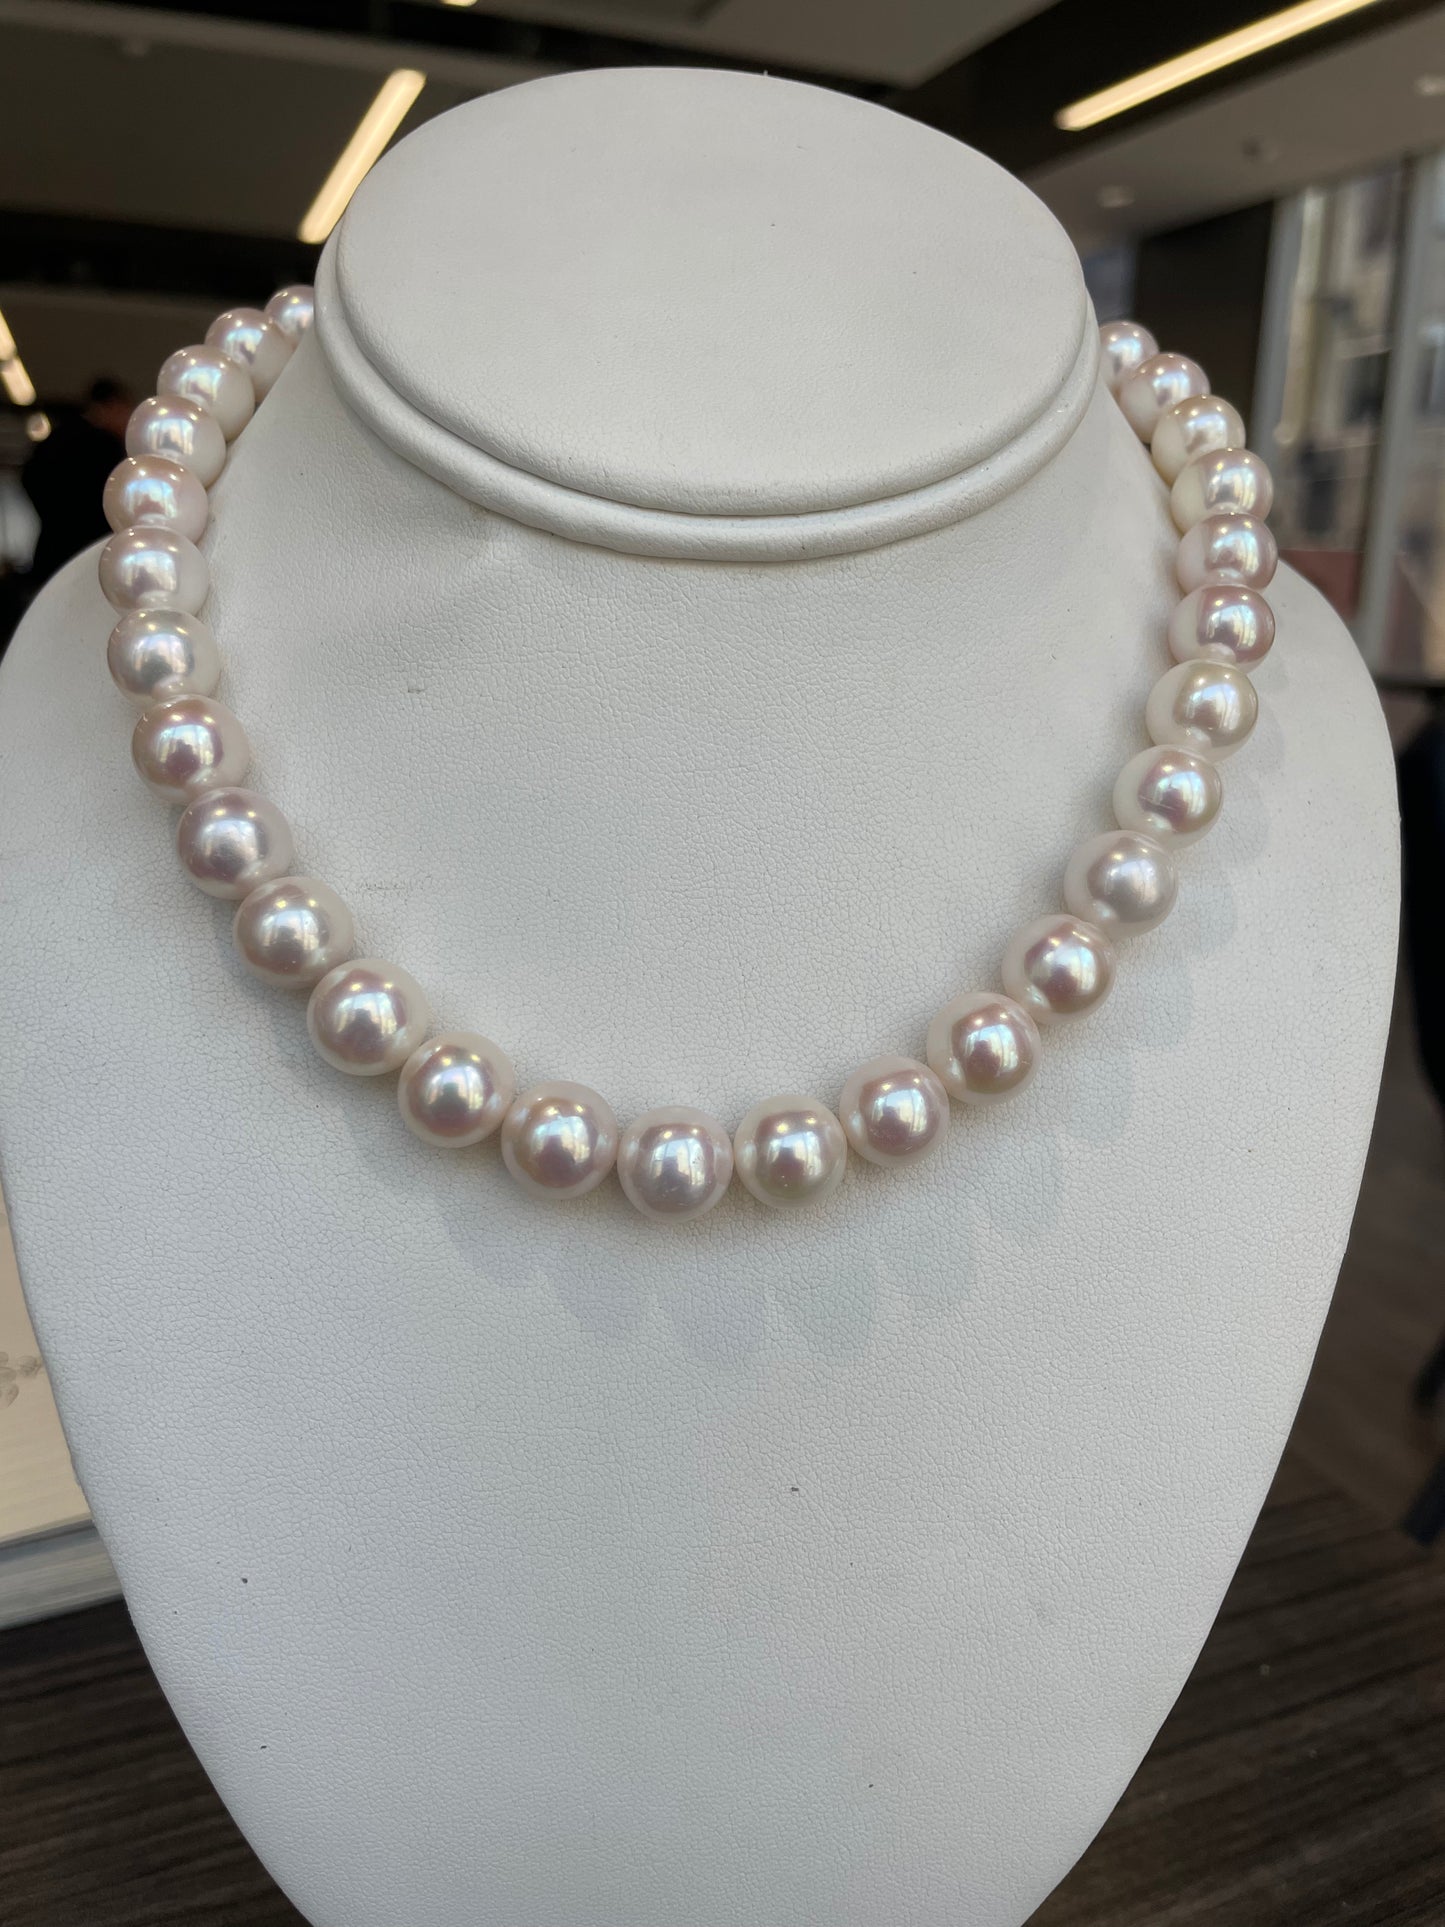 11.5mm Edison Freshwater Pearls. Beautiful Luster and Color.